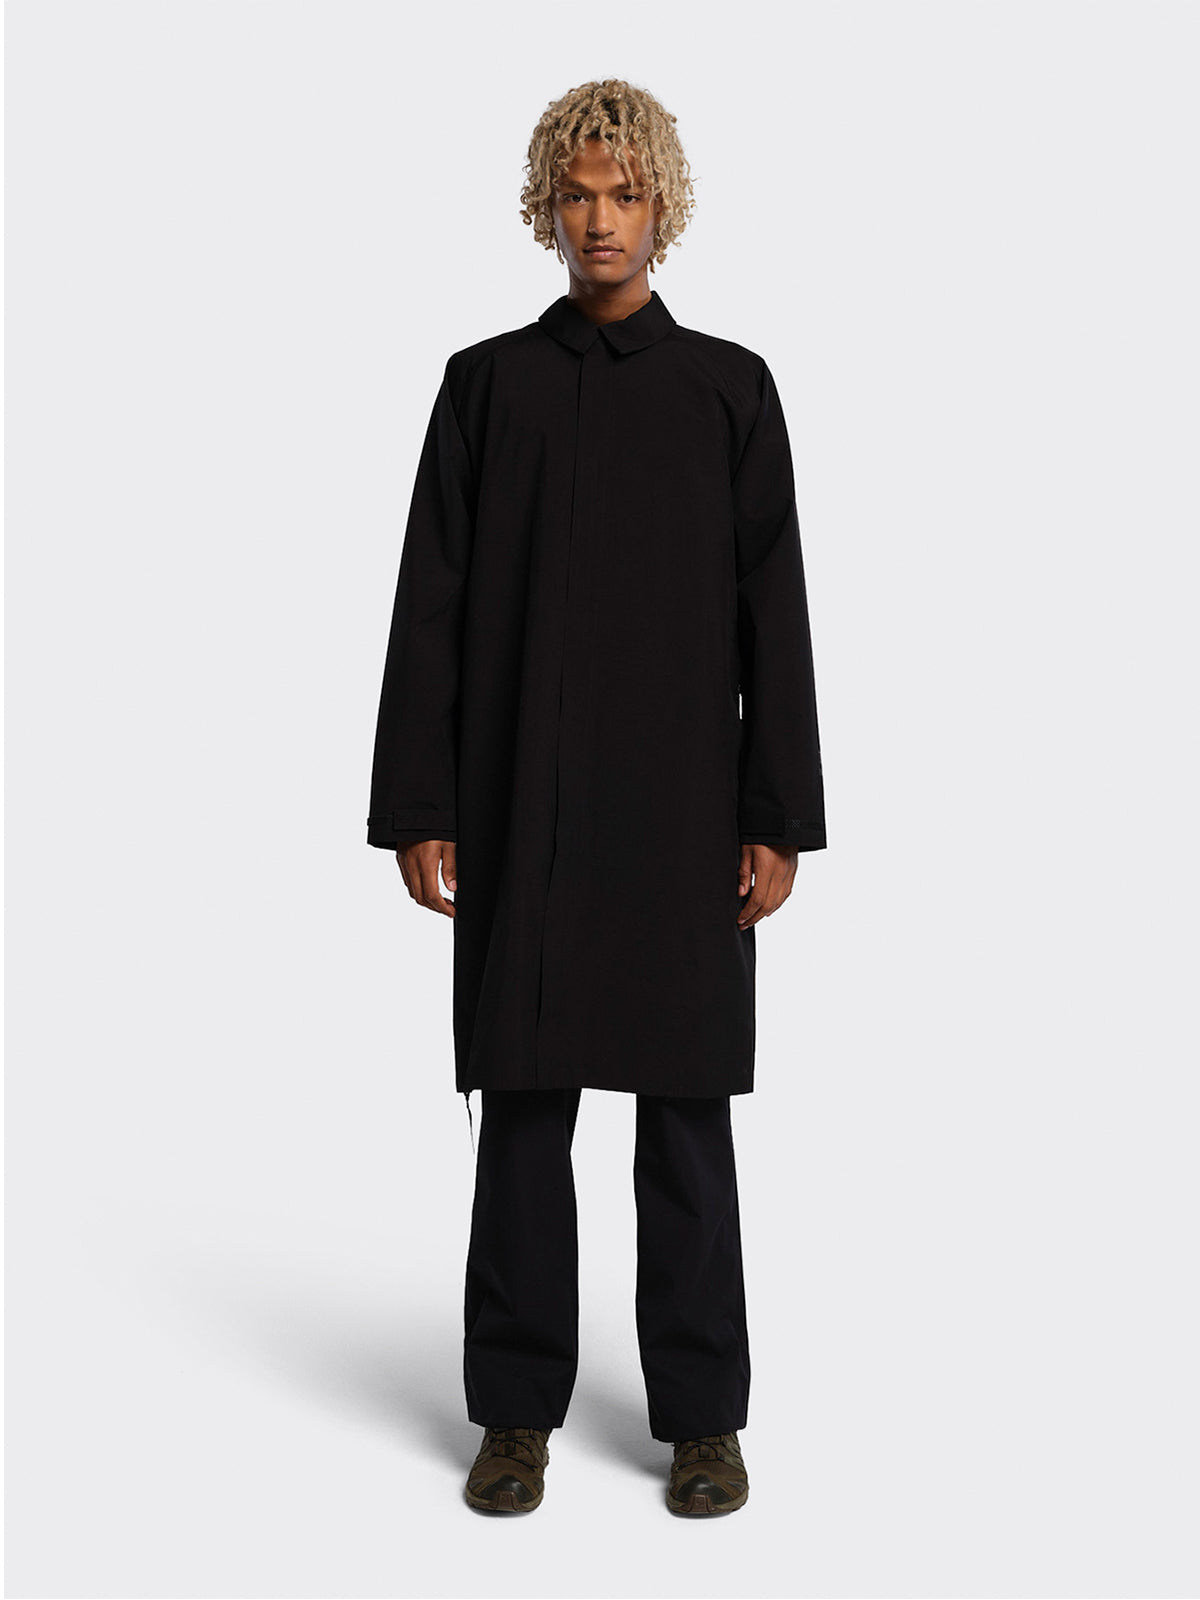 Man wearing Stad coat from Blæst in Black